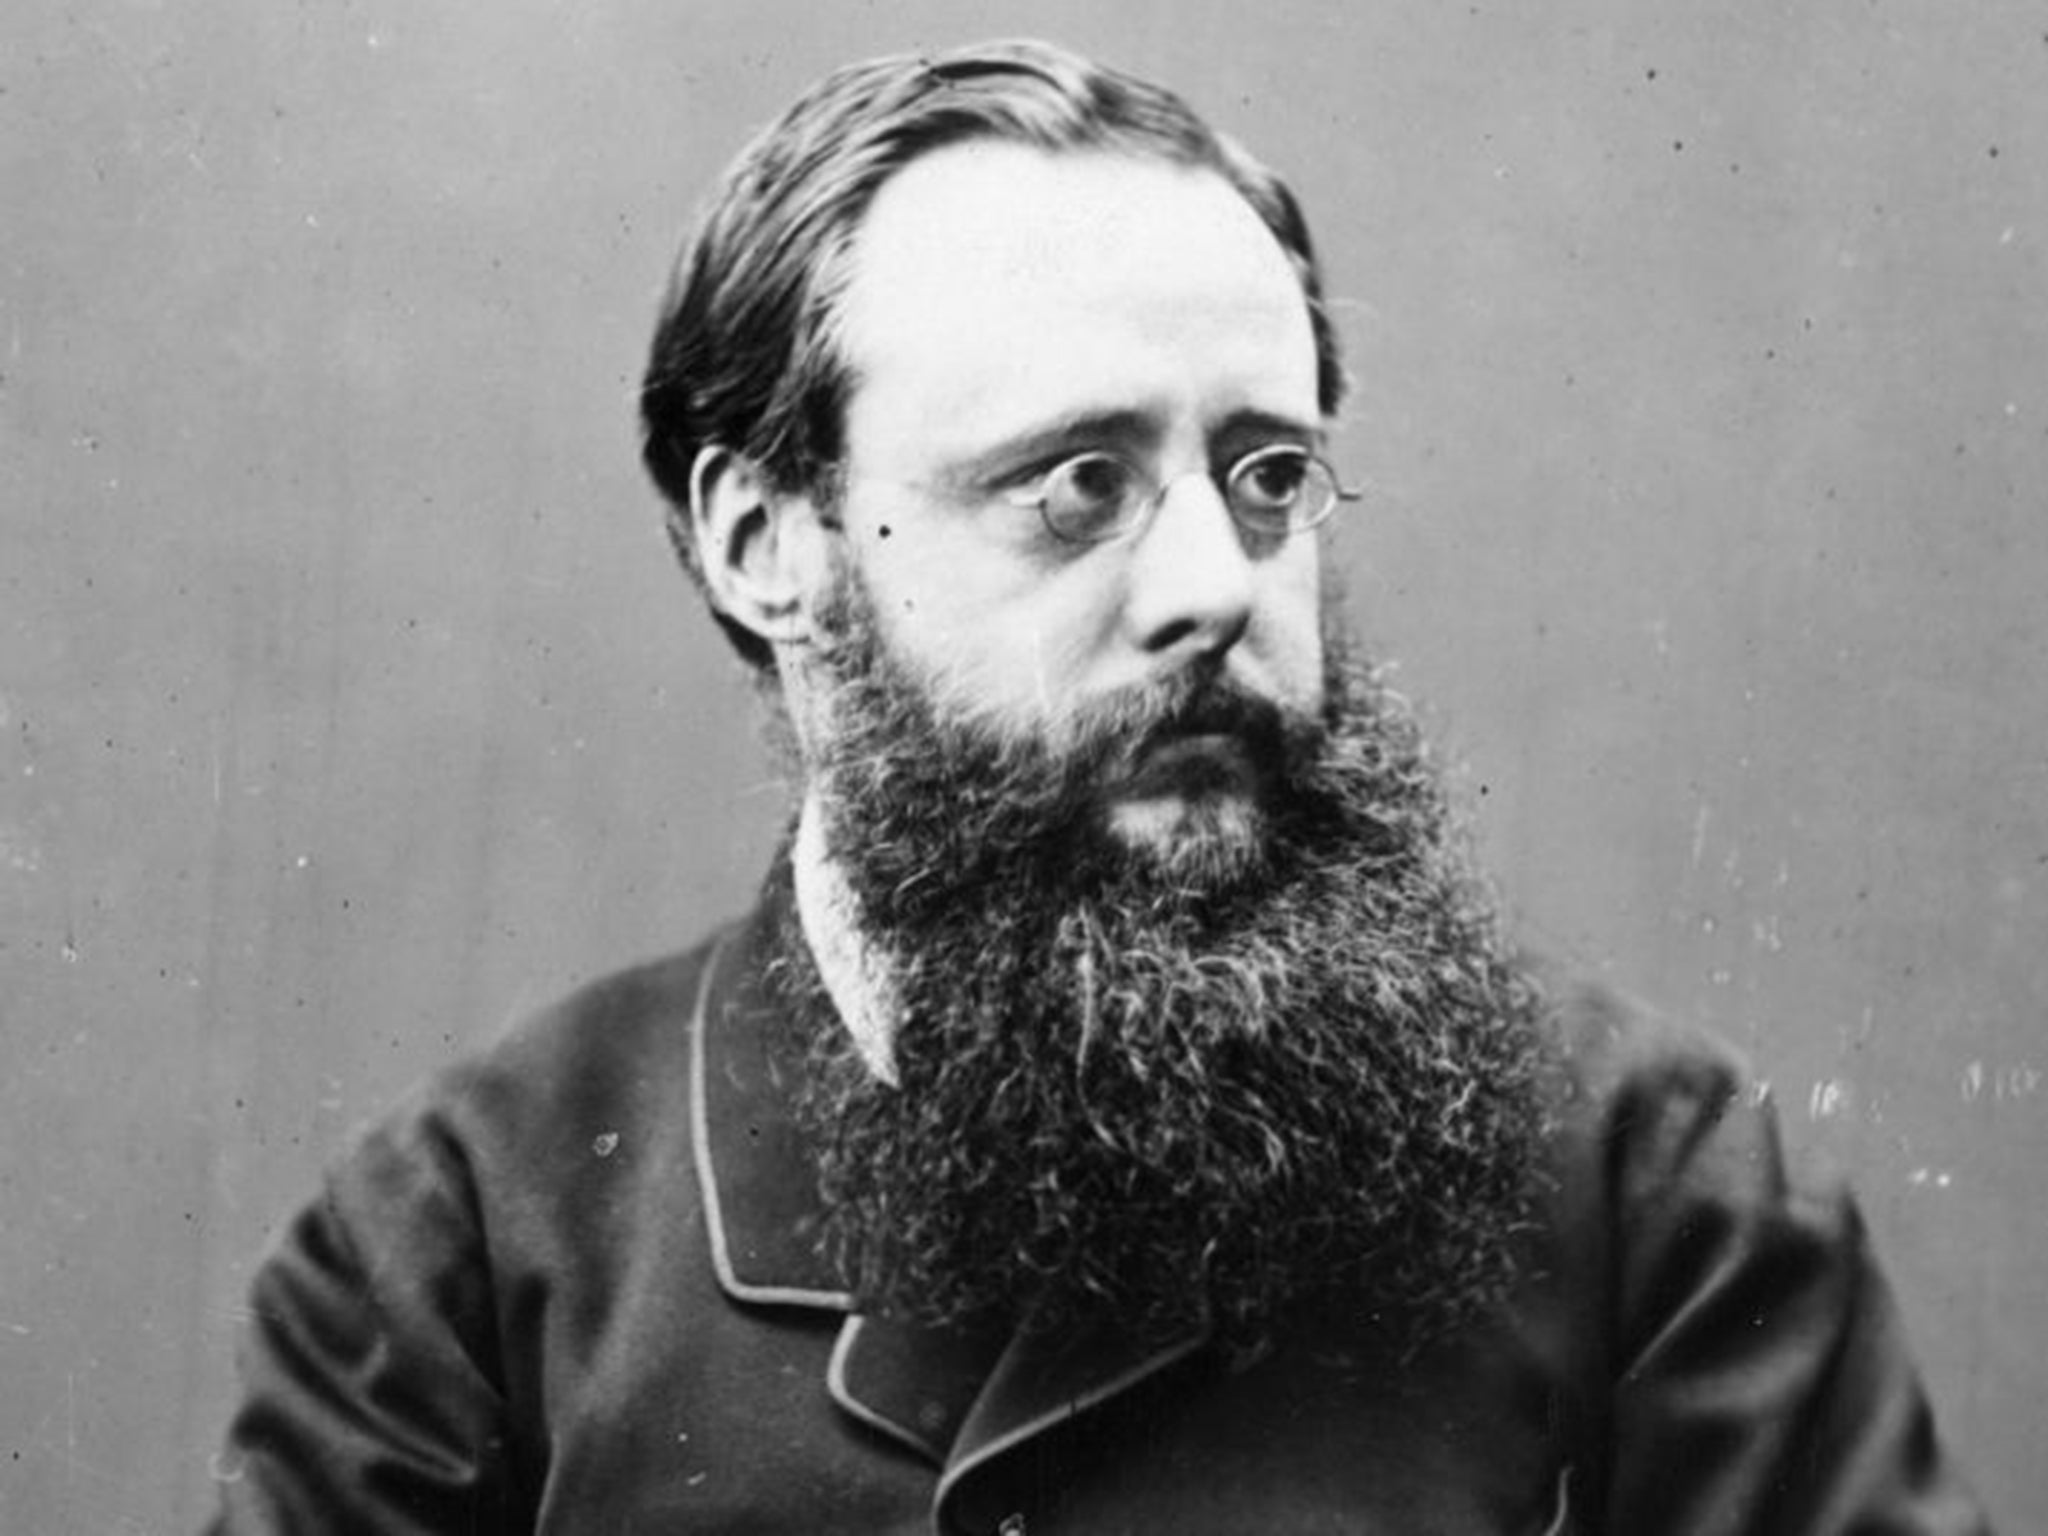 Wilkie Collins: the collection reveals eight pieces by author of The Moonstone which nobody has previously suggested were written by him